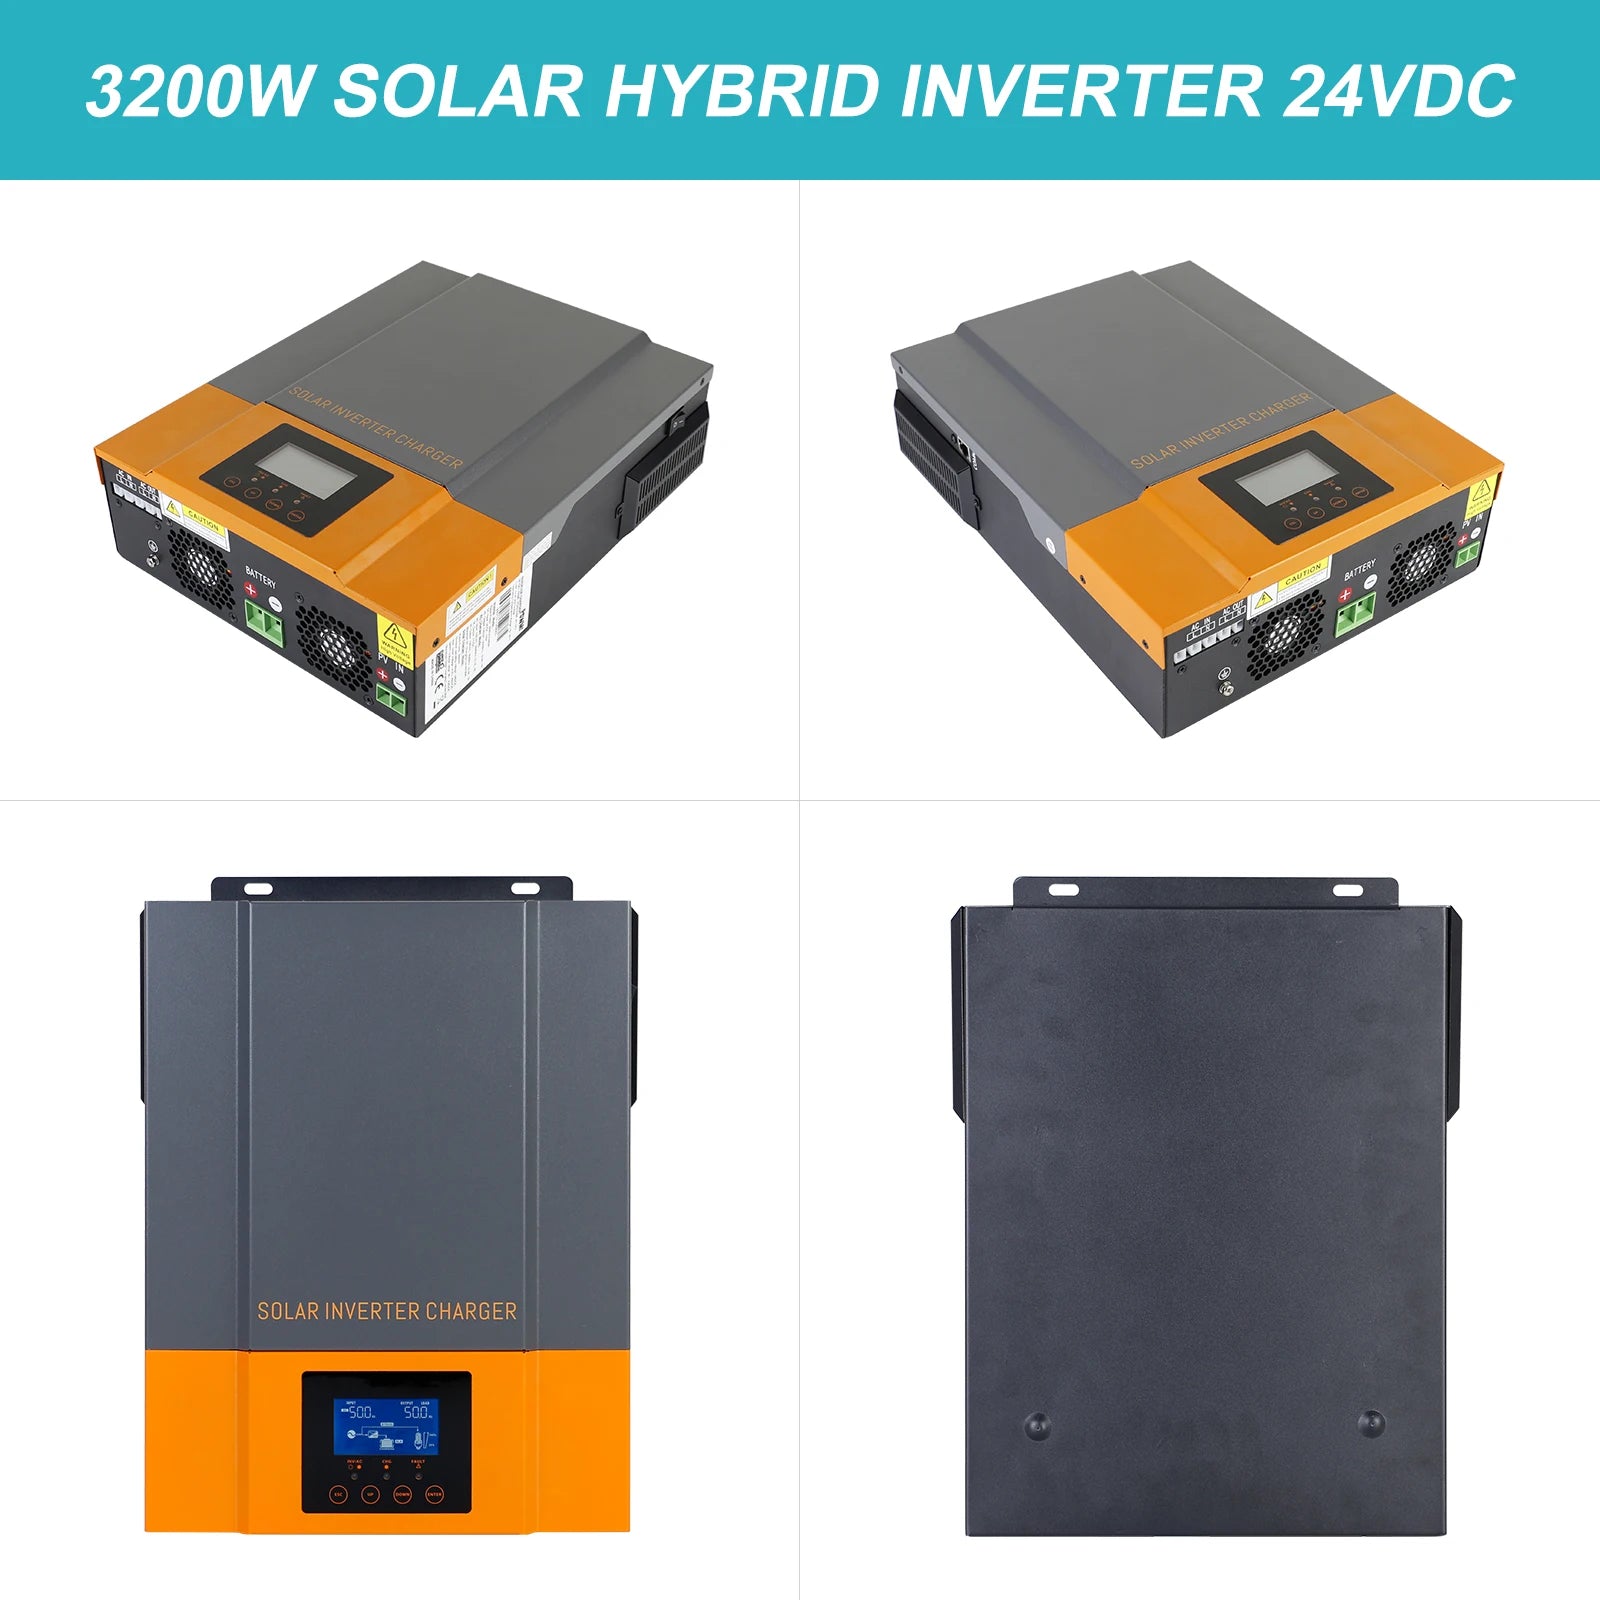 PowMr 3.2KW Hybrid Solar Inverter, Converts 24V DC to 230V AC with MPPT control and 80A output.